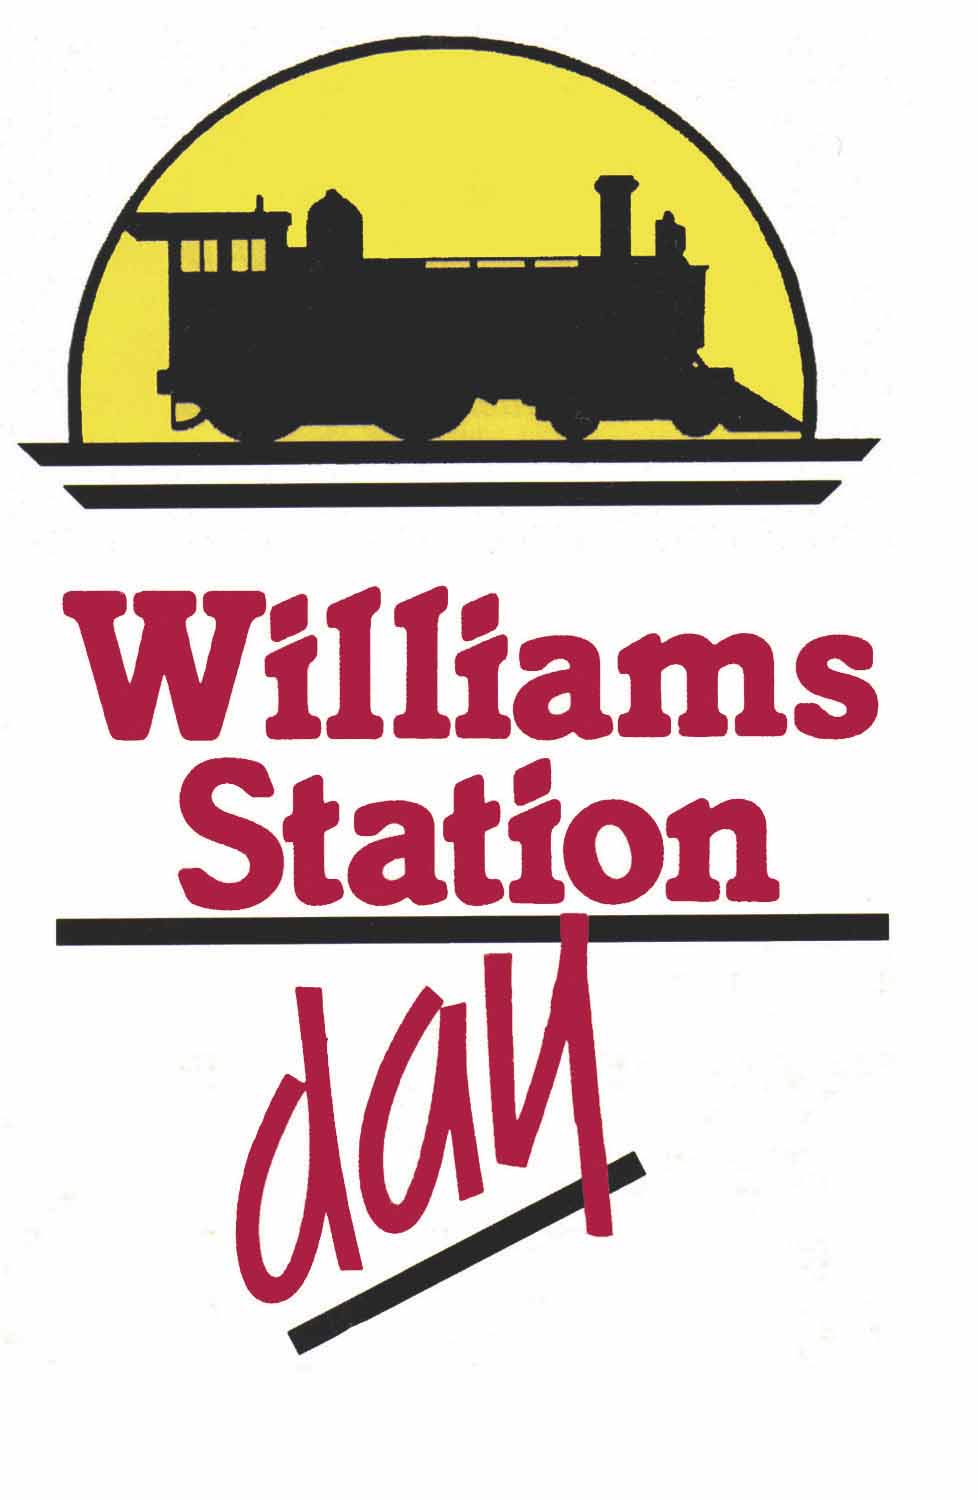 Williams Station Day Atmore News